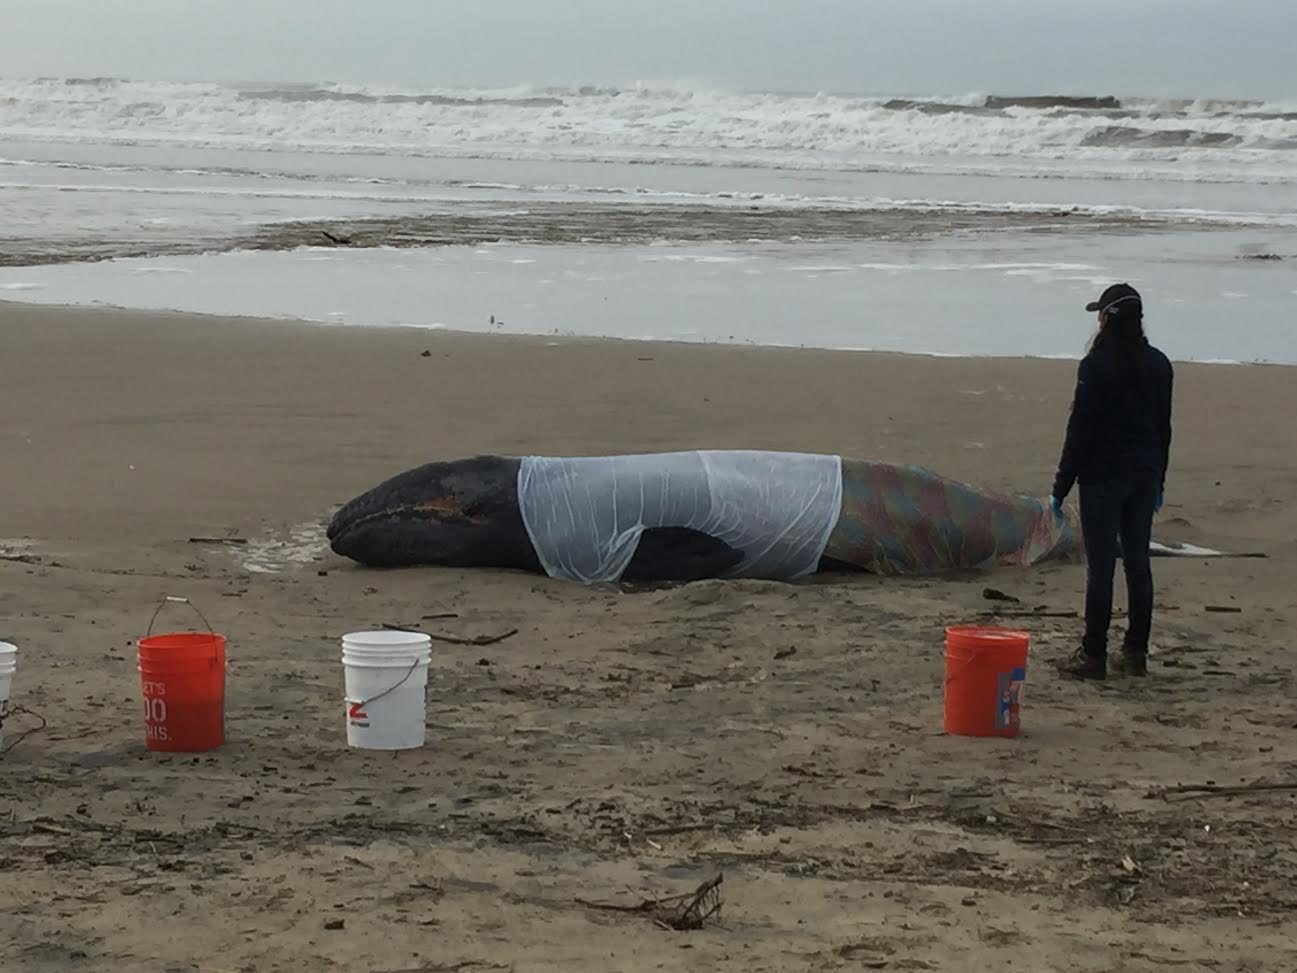 The beached whale was reported to officials at around 7:00 a.m. Tuesday.